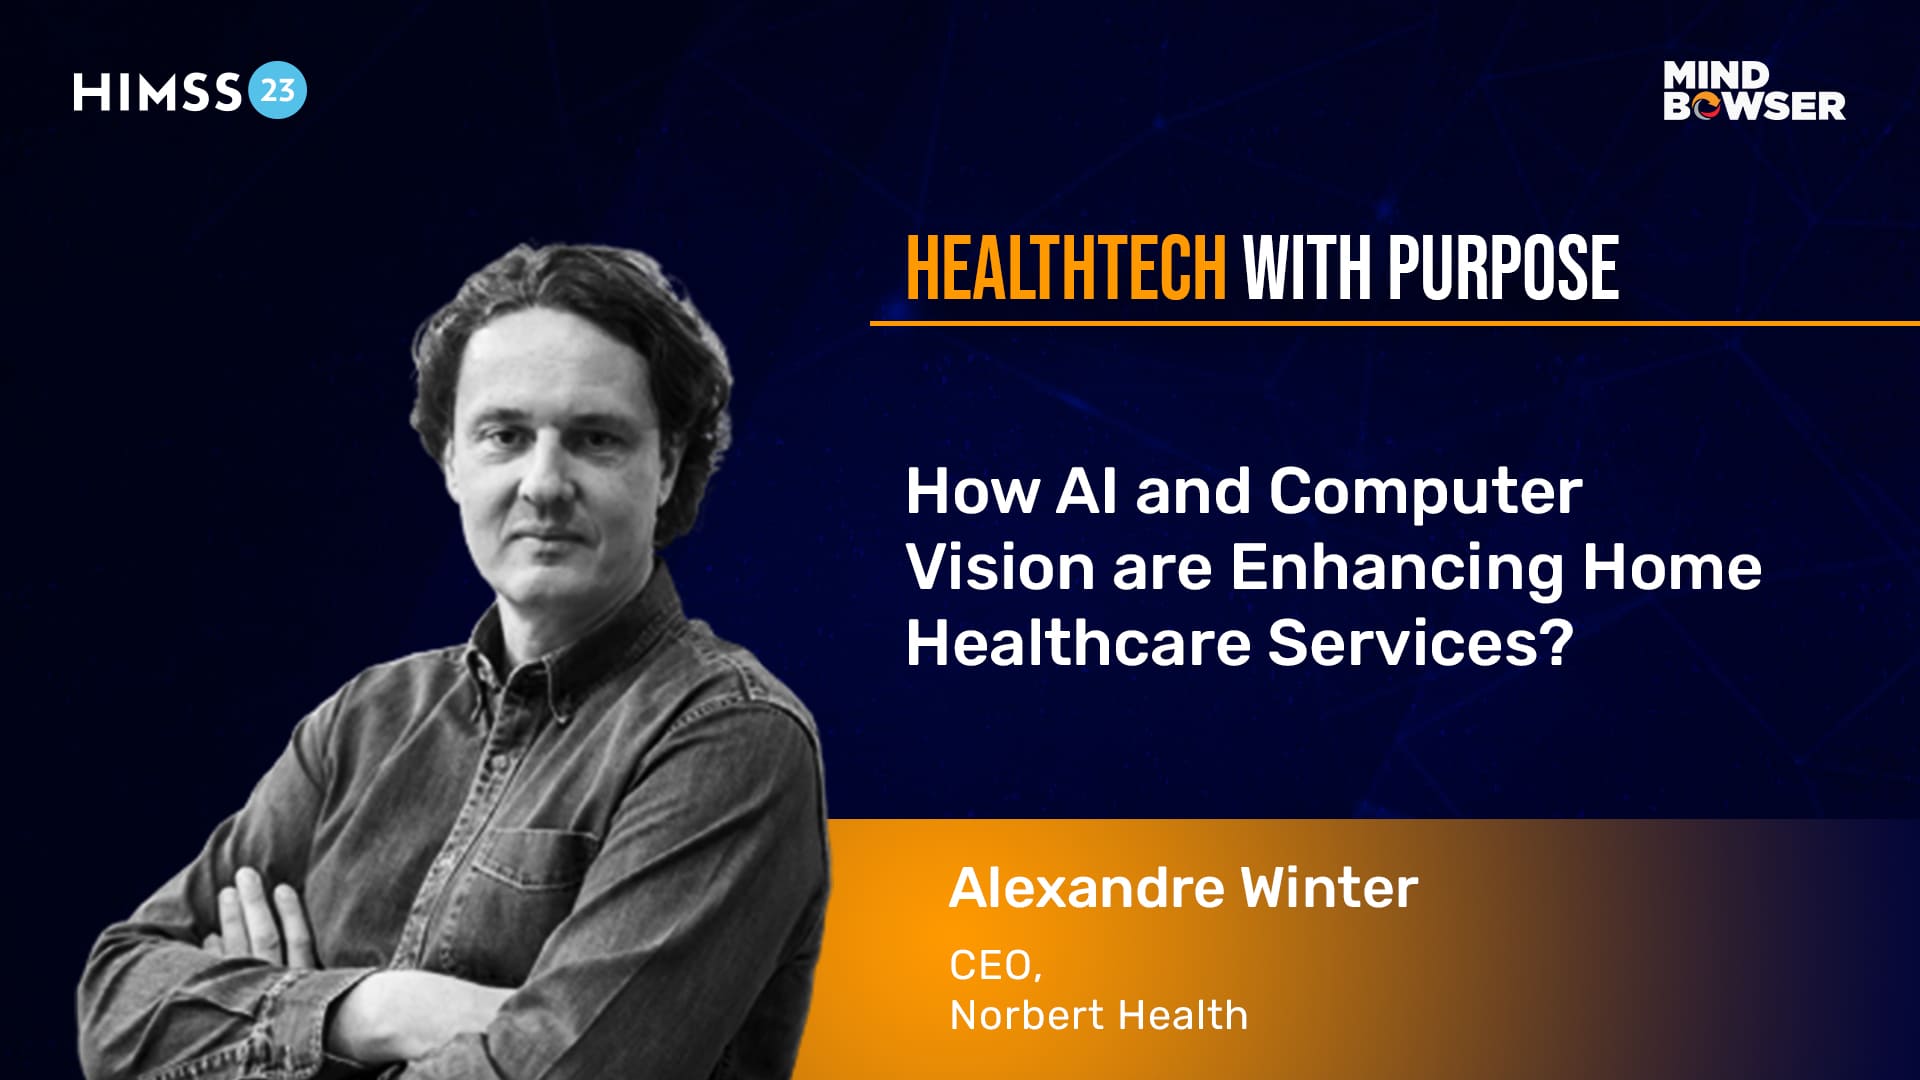 AI and Computer Vision Enhancing Home Healthcare - Podcast by Alexandre Winter